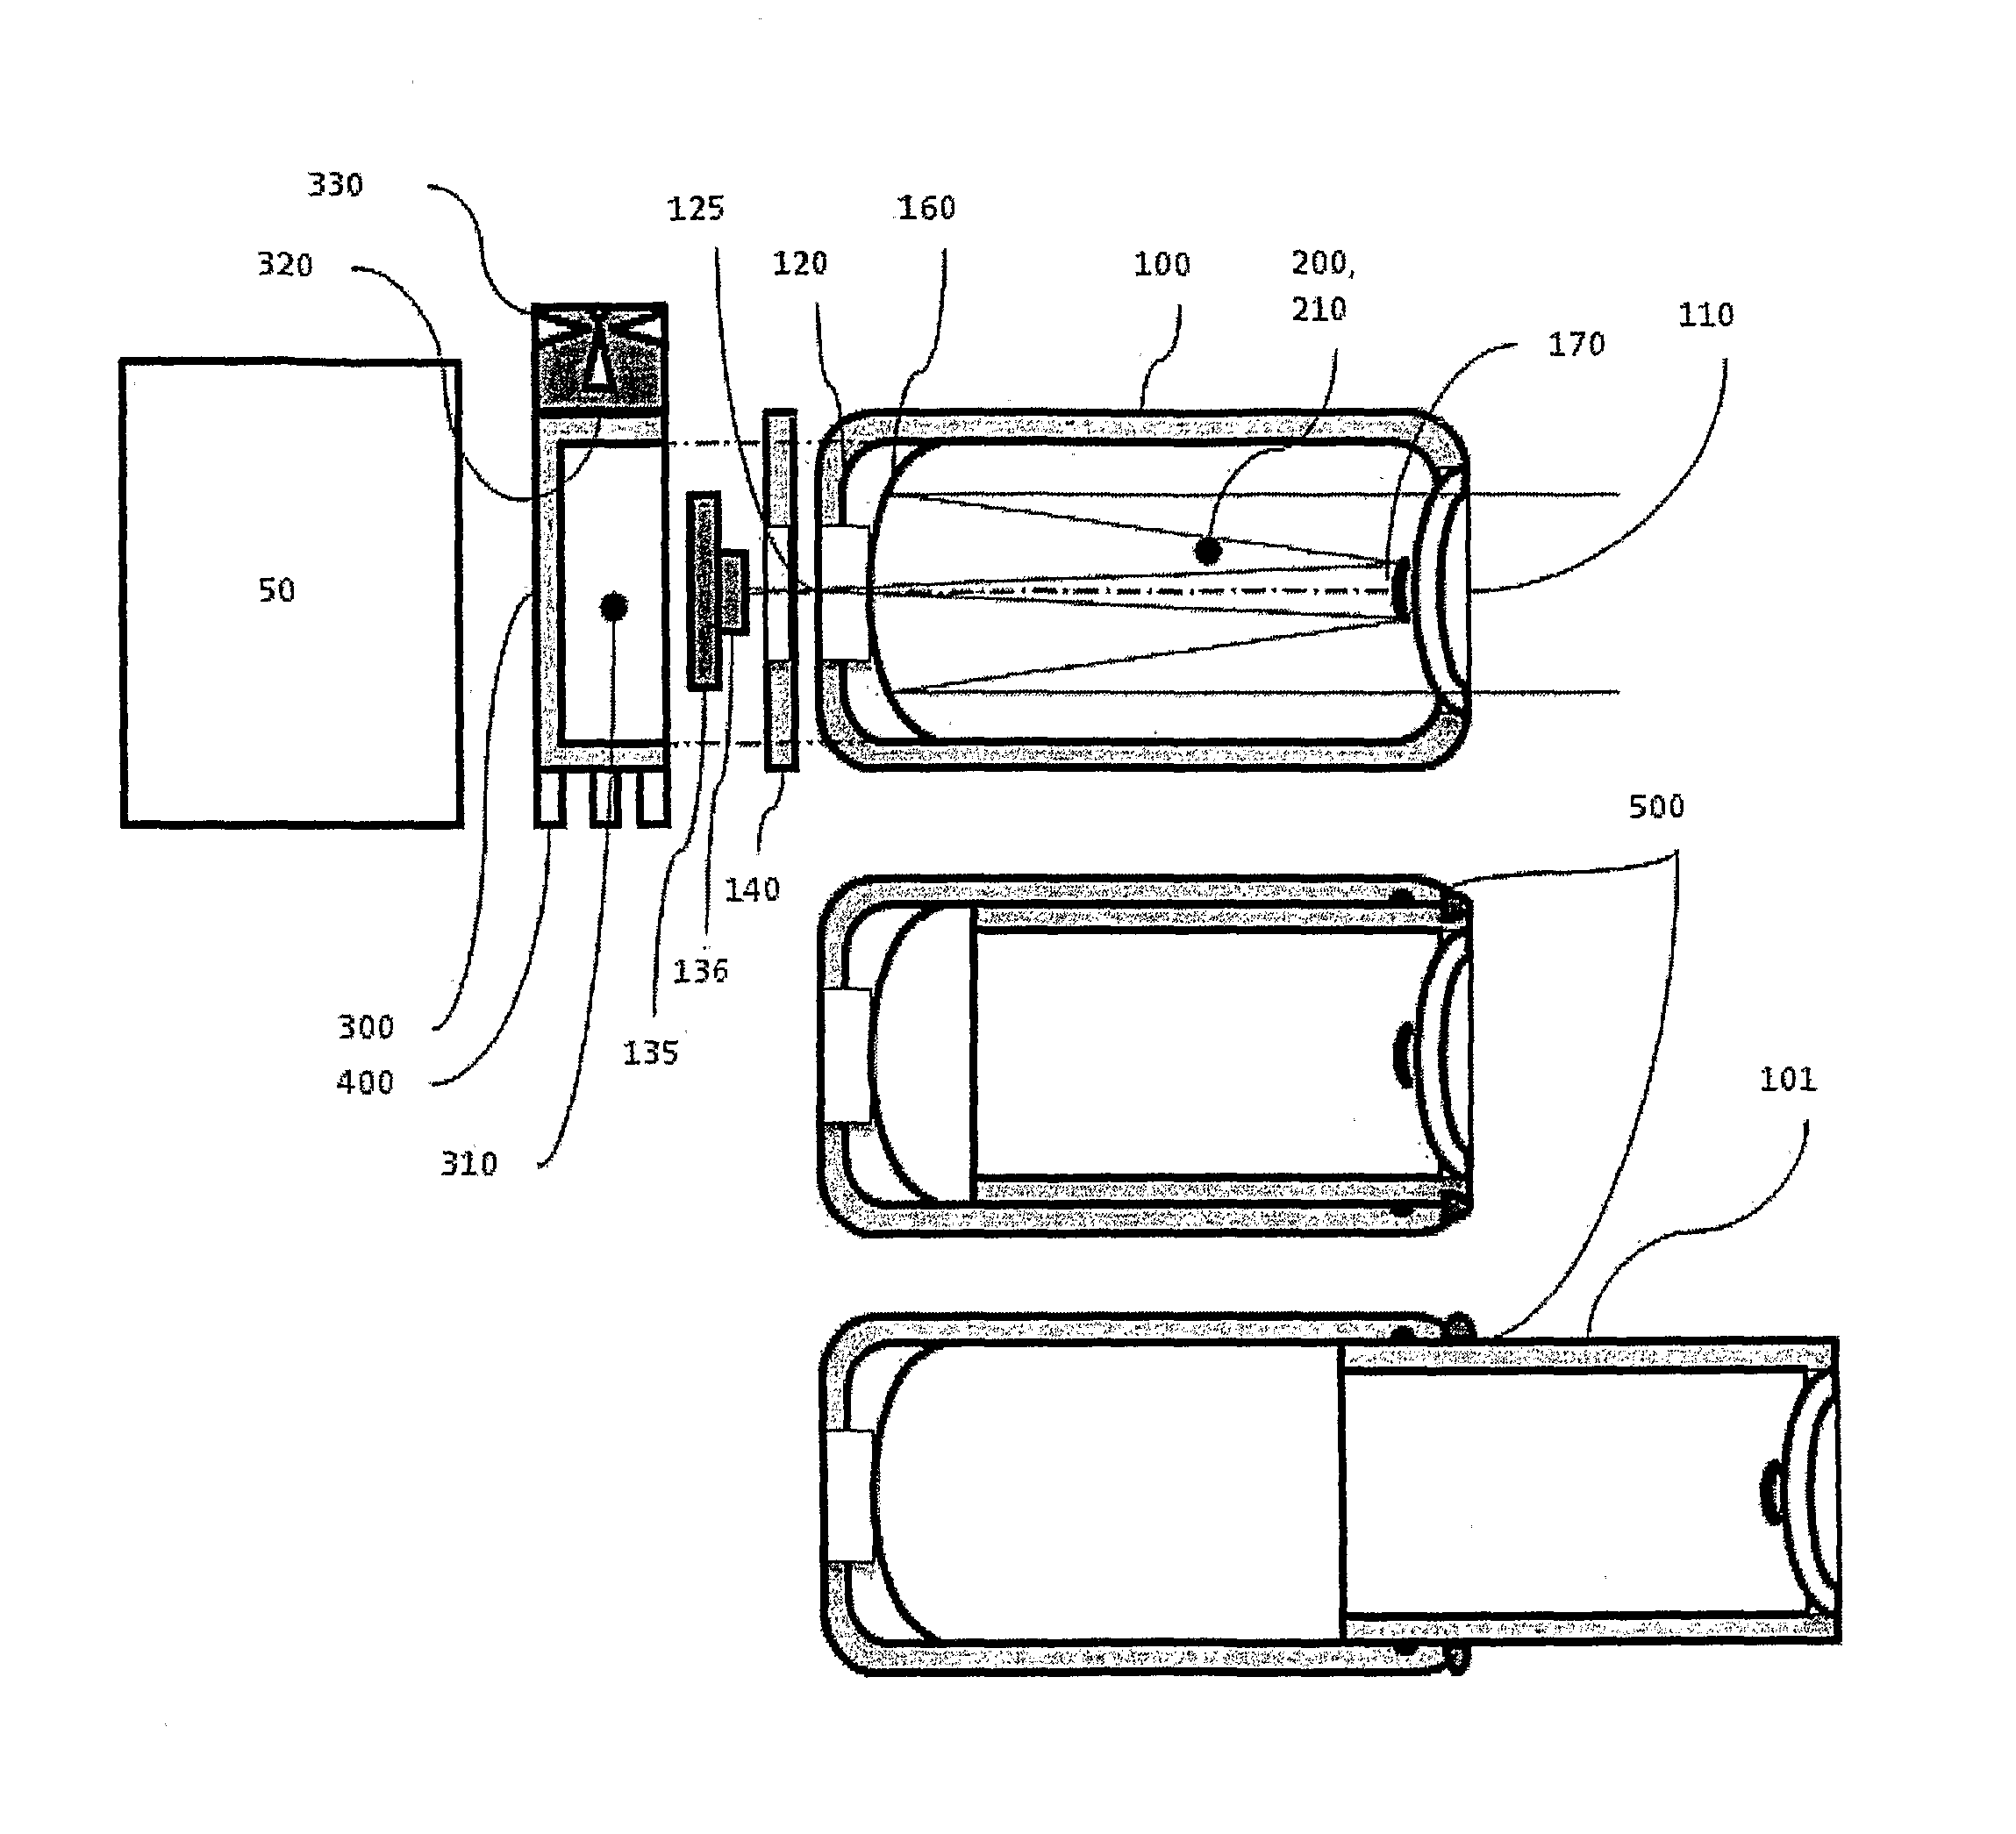  microsatellite comprising a propulsion module and an imaging device